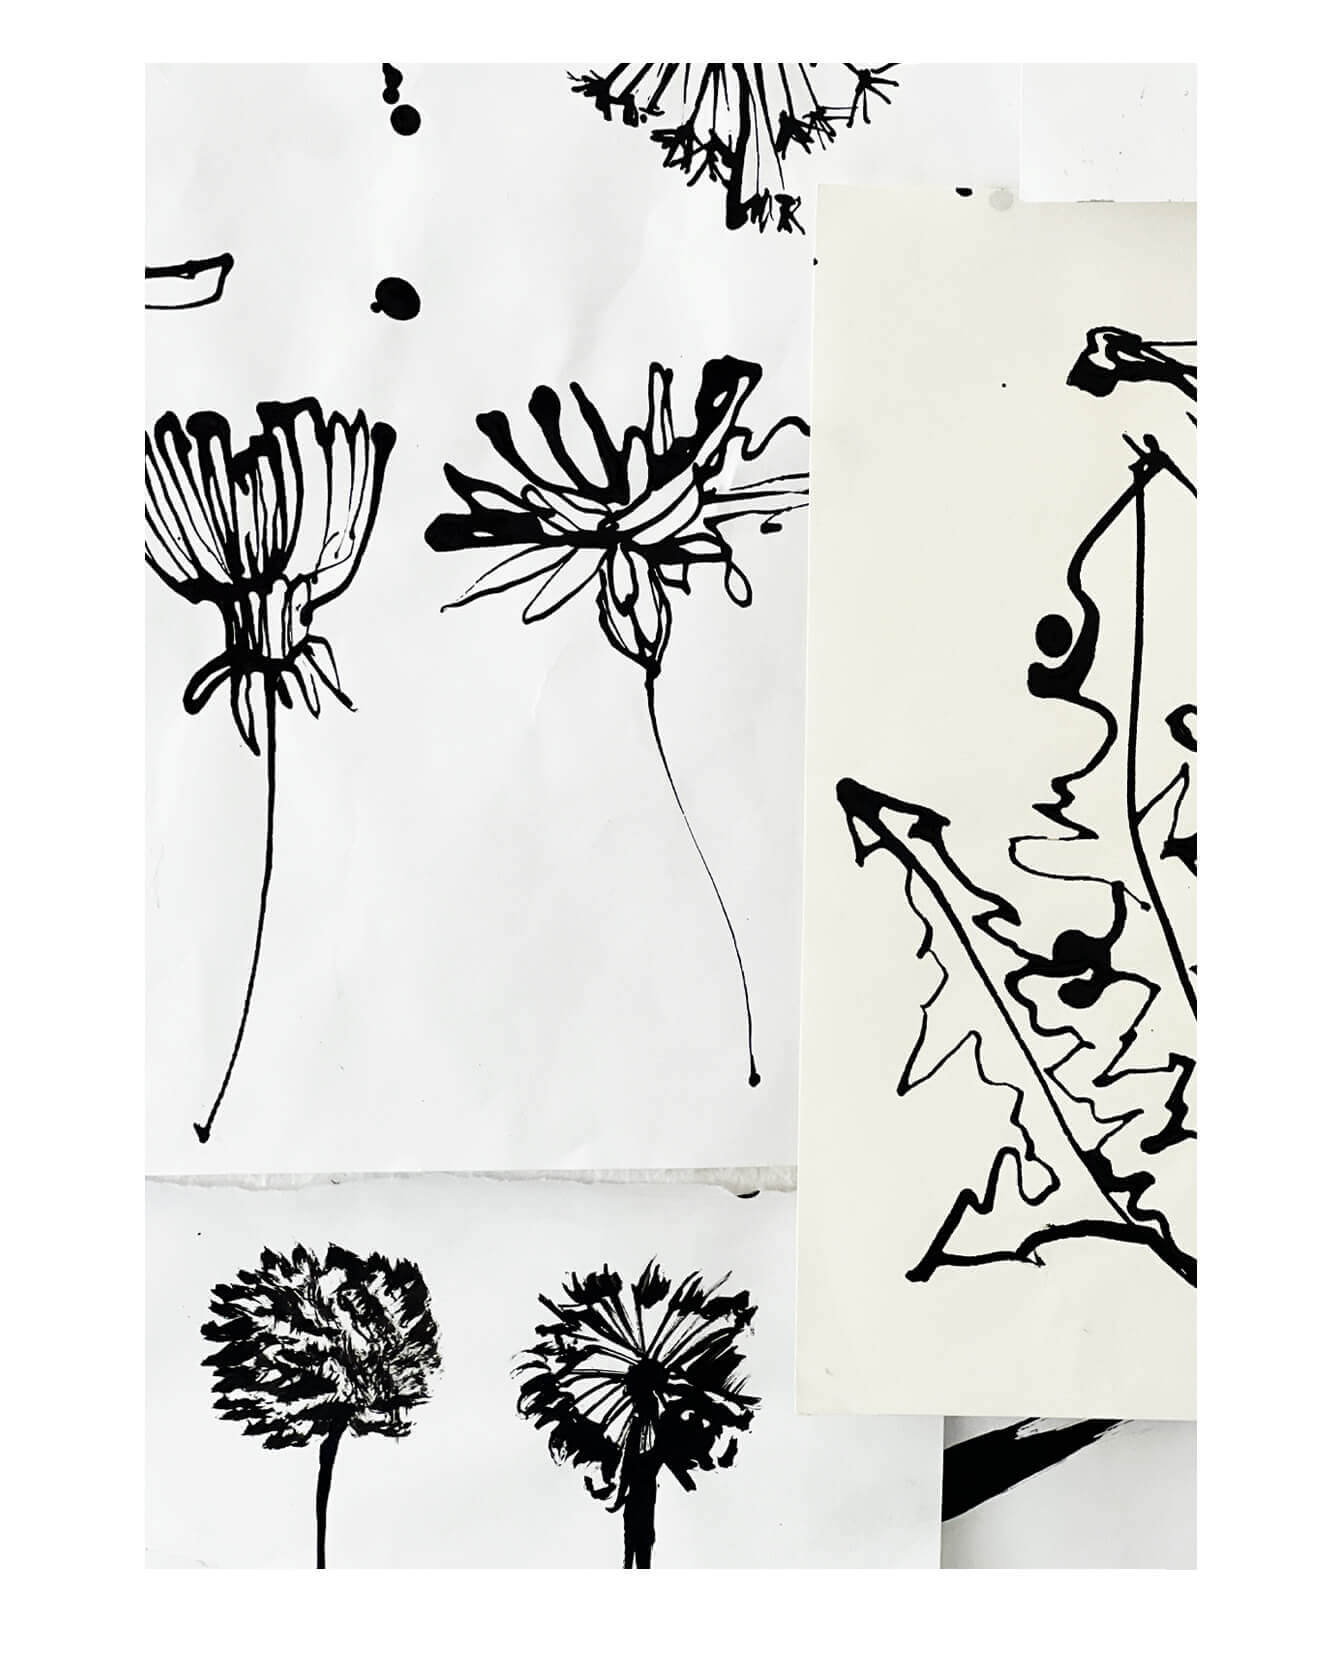 Sketches of a dandelions, and florals. The work in progress for the line artwork for an illustrated label for a hot toddy kit for interior agency Meadquin, part of a pack sent to clients for Christmas. Capturing a dandelion ink ink.A simple line artwork for an illustrated label for a hot toddy kit for interior agency Meadquin, part of a pack sent to clients for Christmas. Capturing a dandelion ink ink.